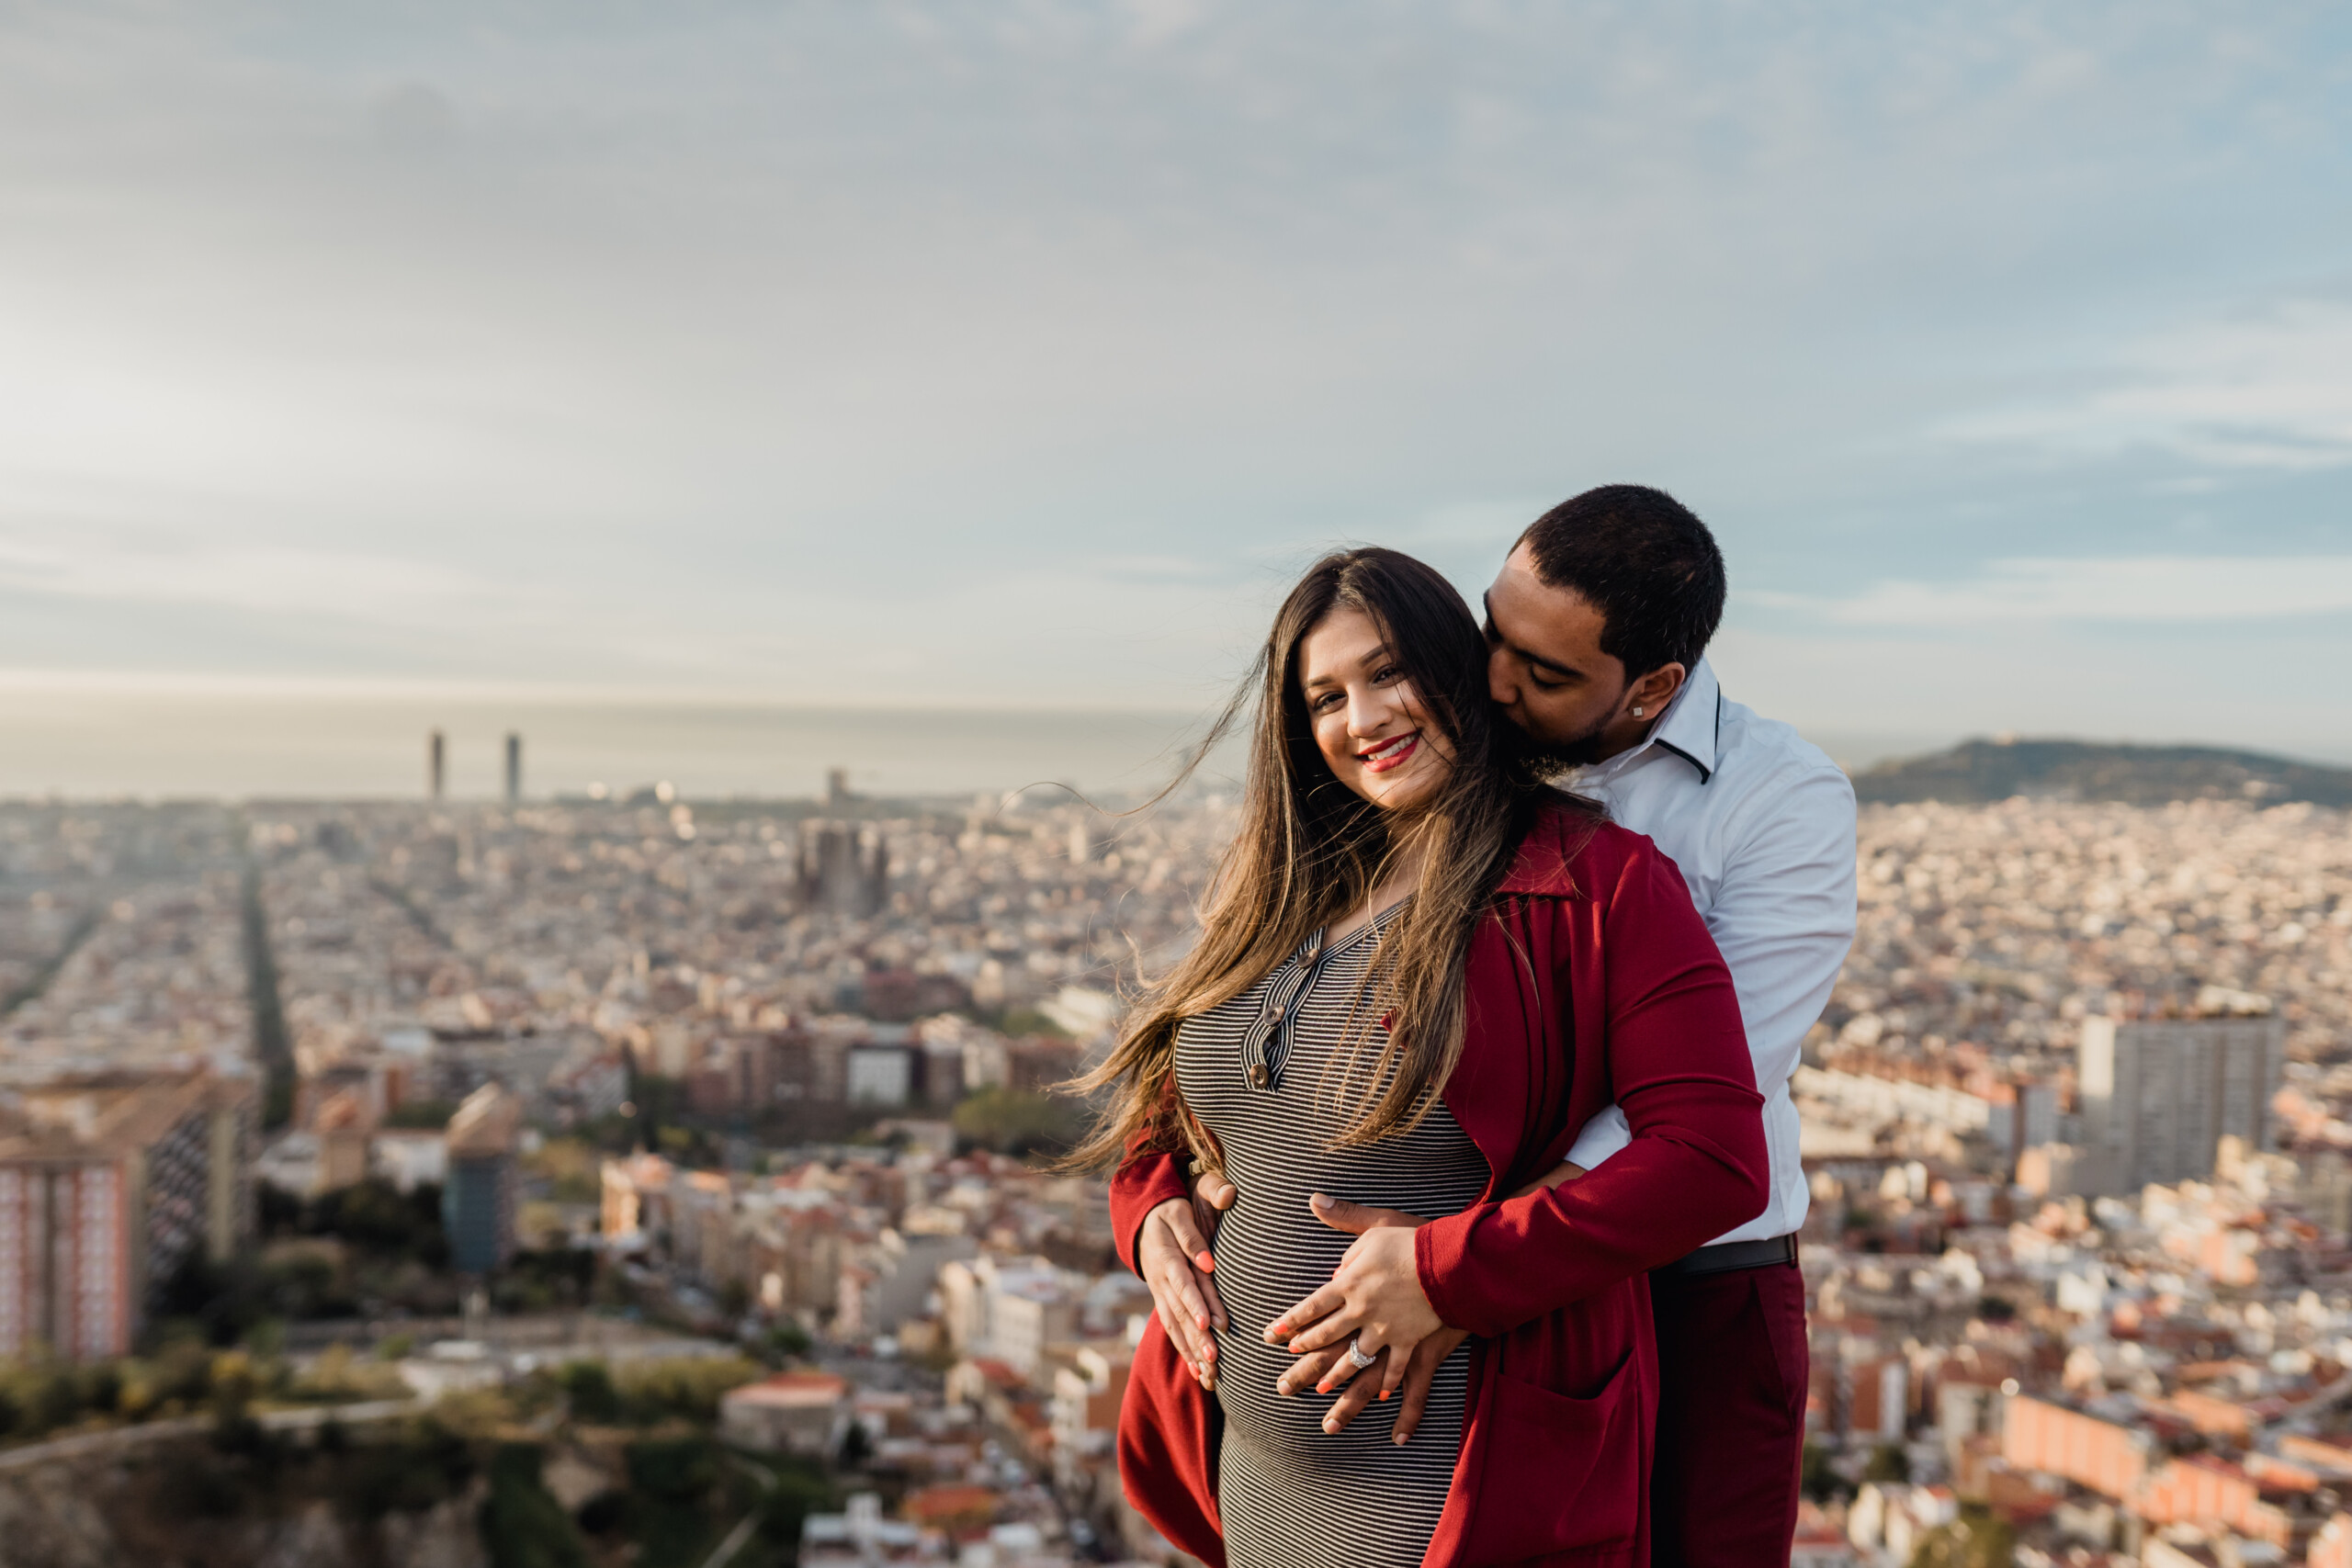 Maternity photoshoot by Anna, Localgrapher in Barcelona